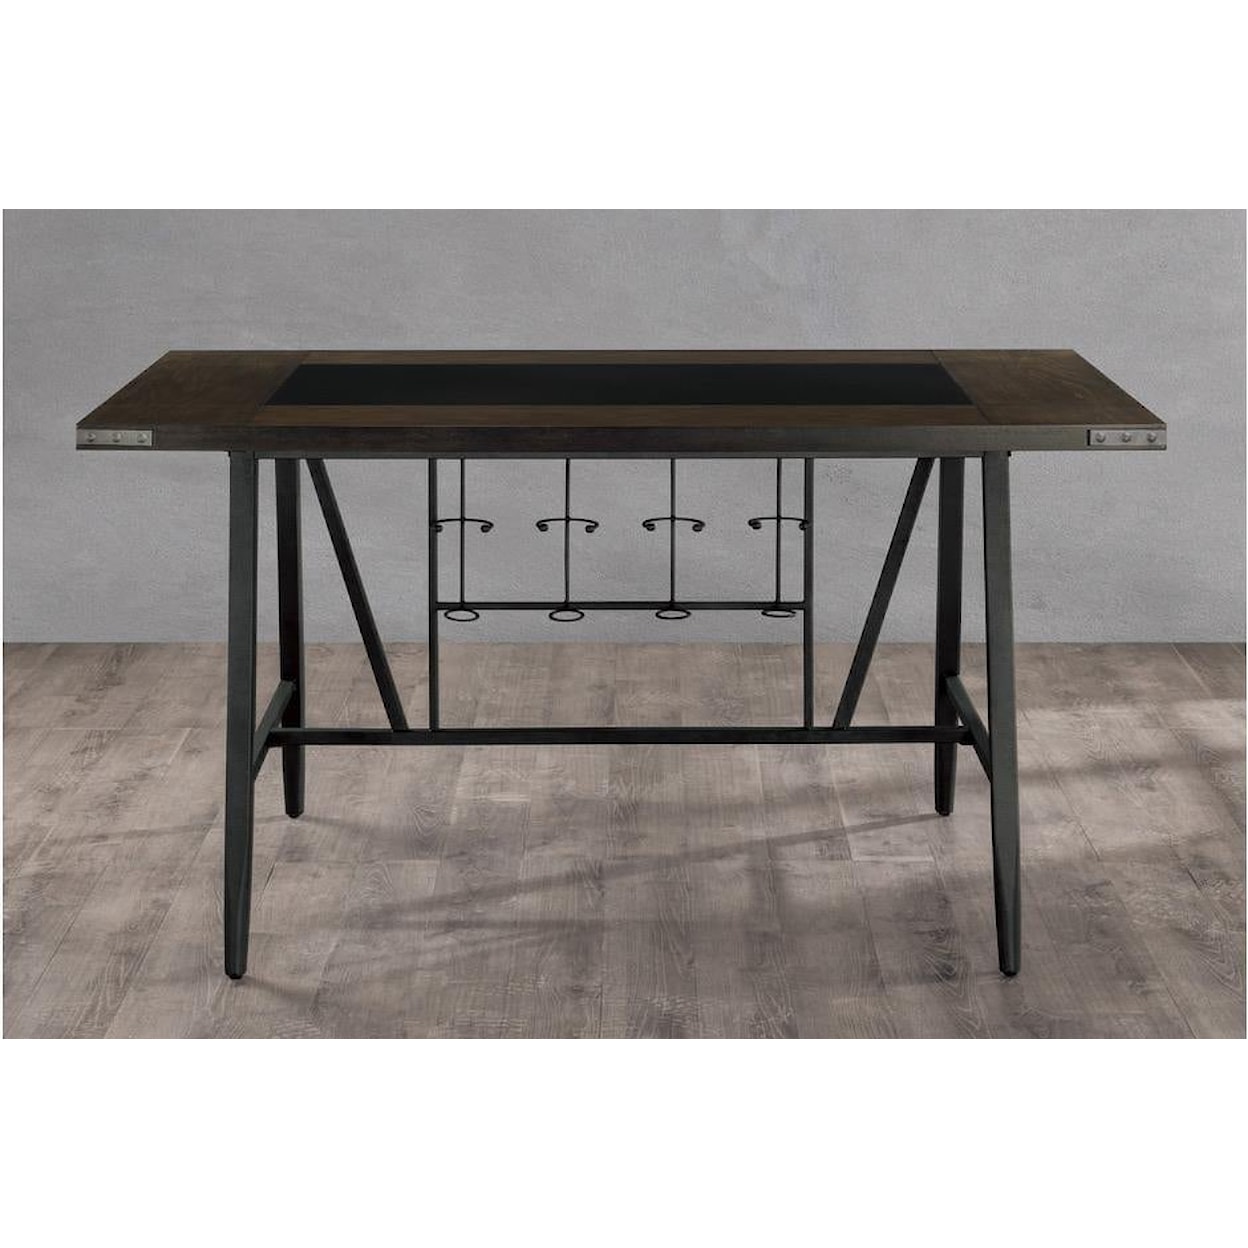 Titanic Furniture Chicago CHICAGO MODERN WOOD AND GLASS TABLE |